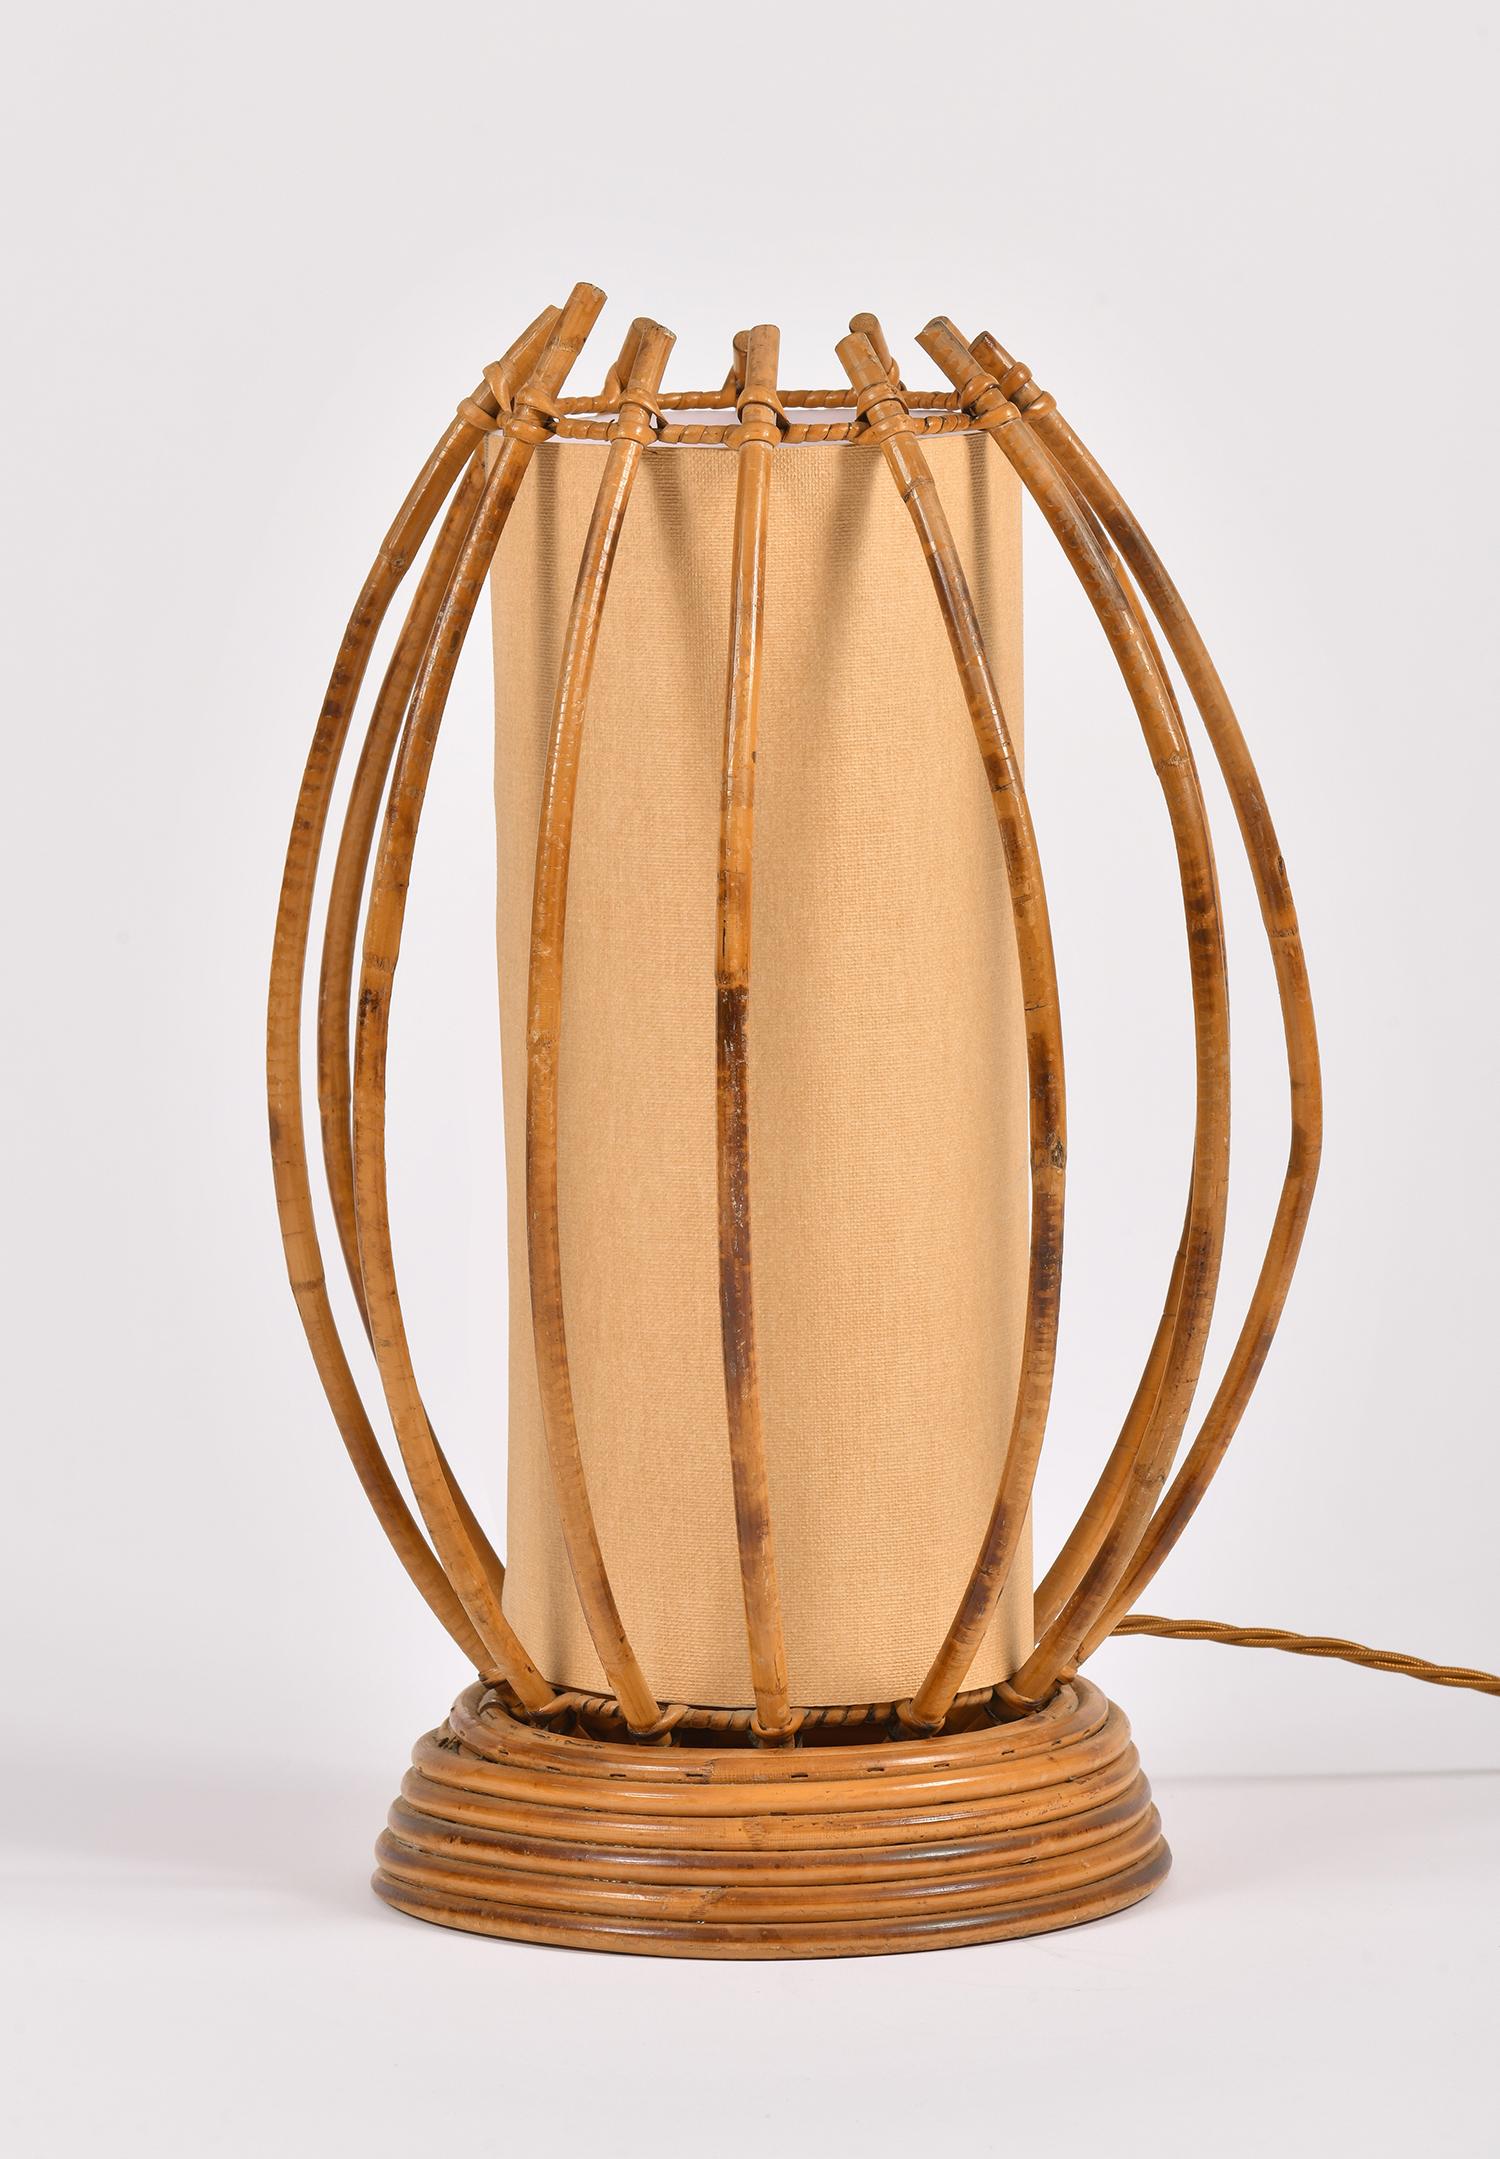 A bamboo and rattan table lamp
France, circa 1955.